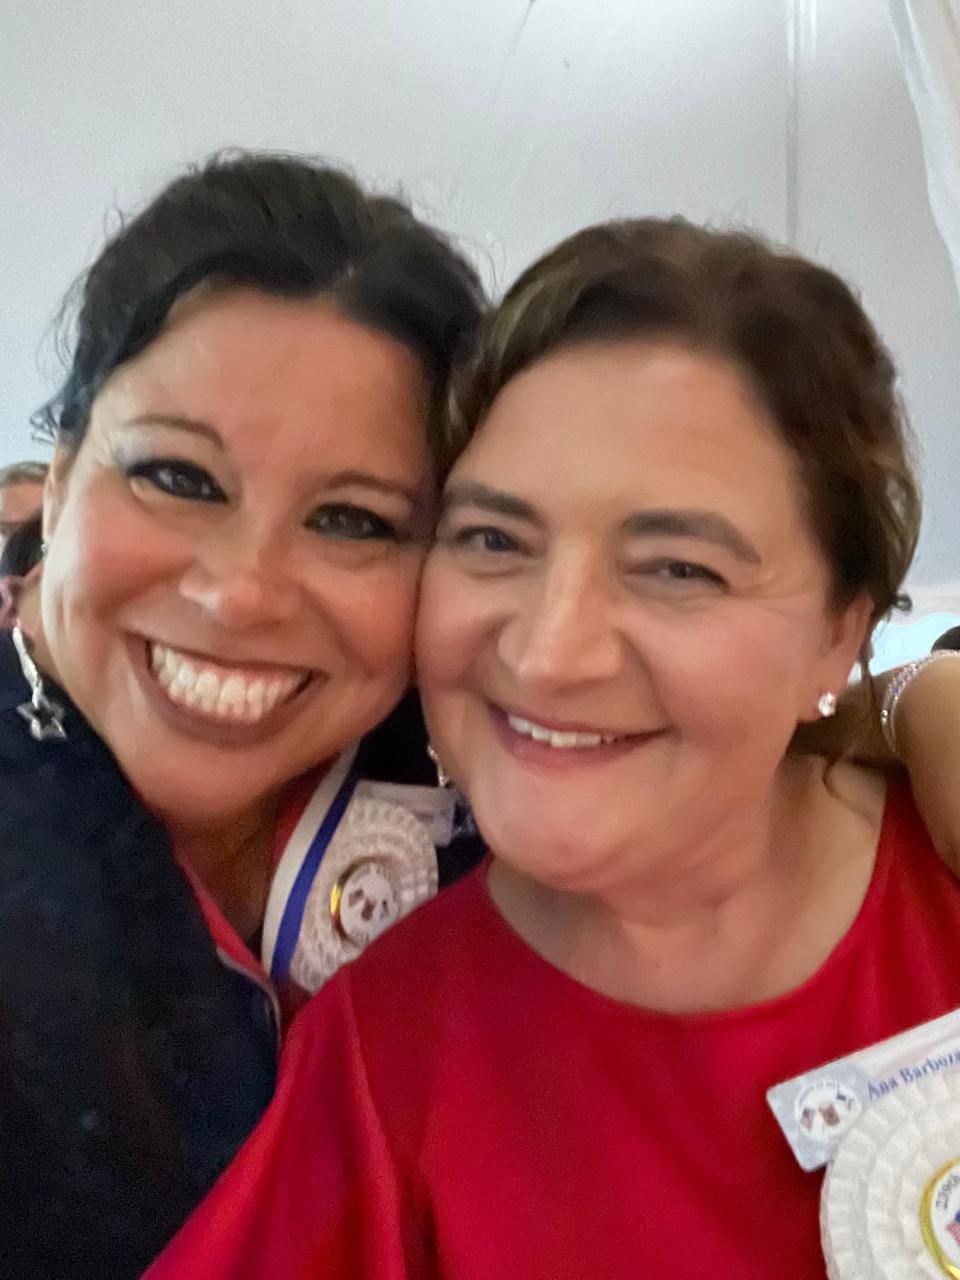 Camille Teixeira and Ana Motta, general chairman and vice chairman of the Bristol Fourth of July celebrations, pose for a photo.